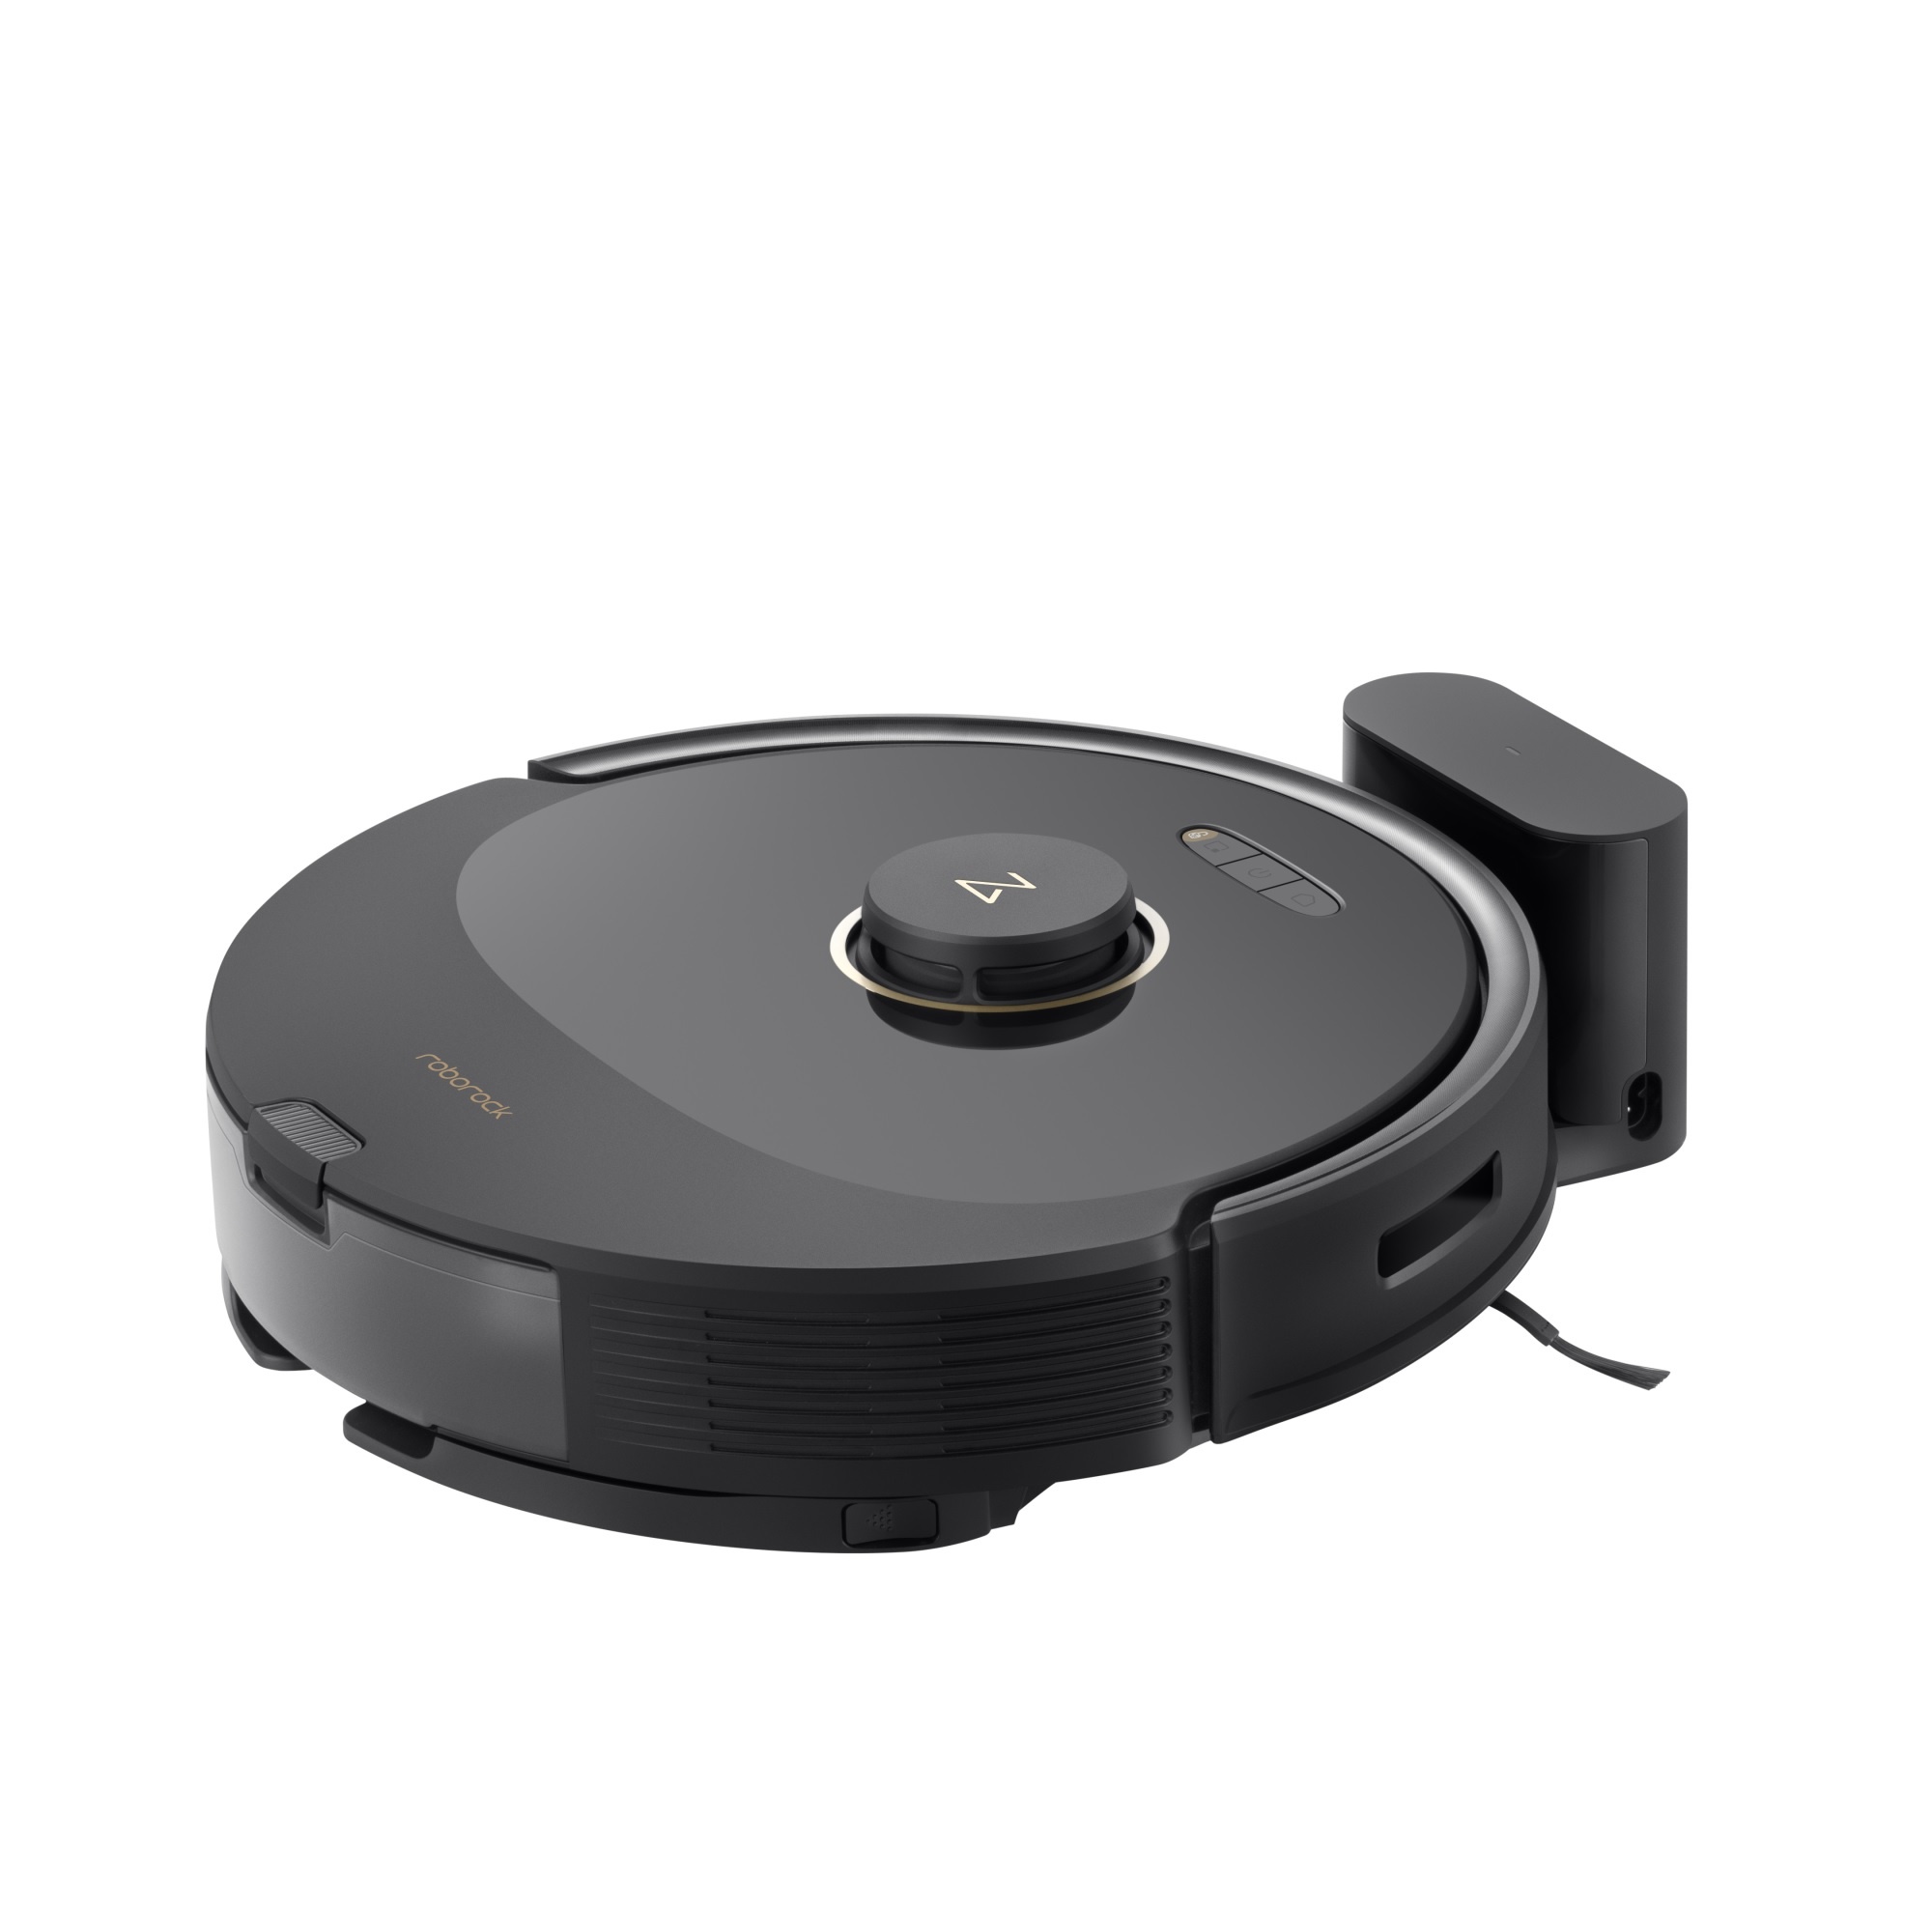 Roborock Q8 Max Series review: A meticulous robot vacuum with